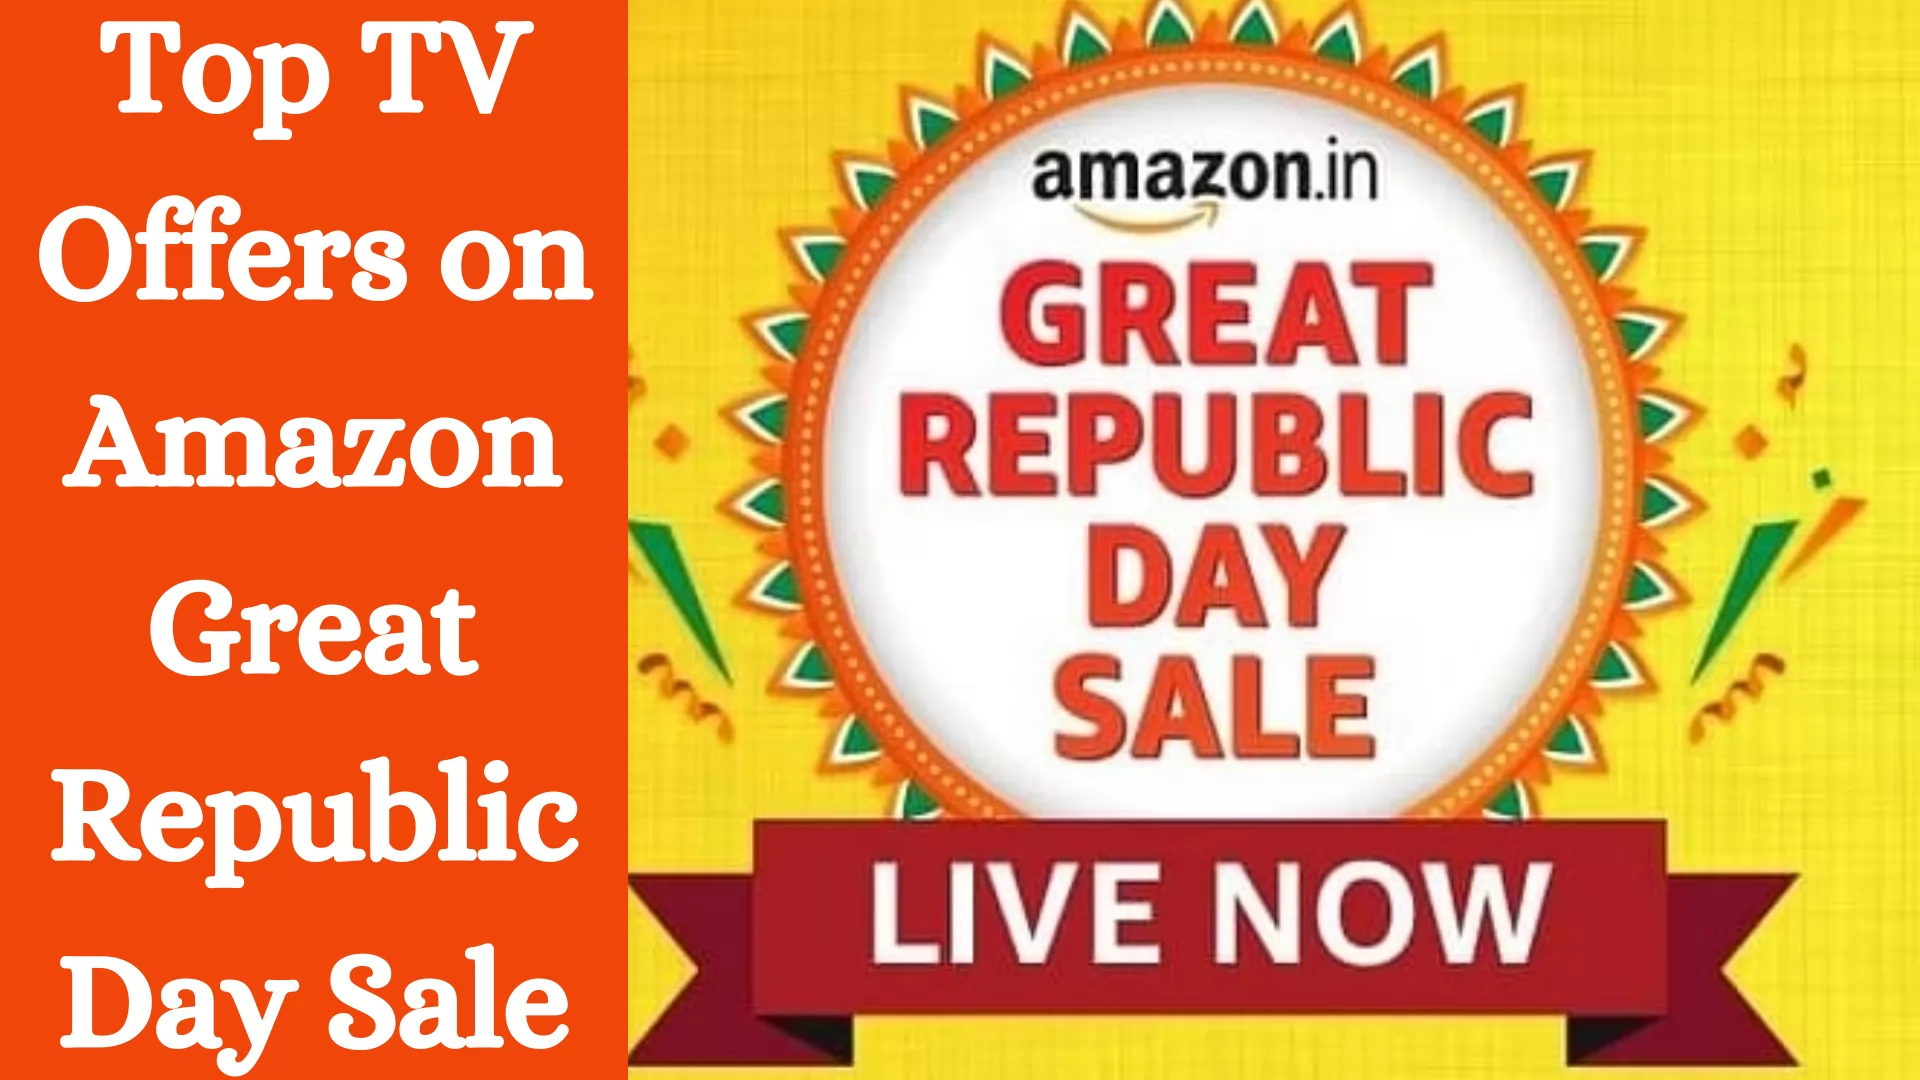 Top TV Offers on Amazon Great Republic Day Sale